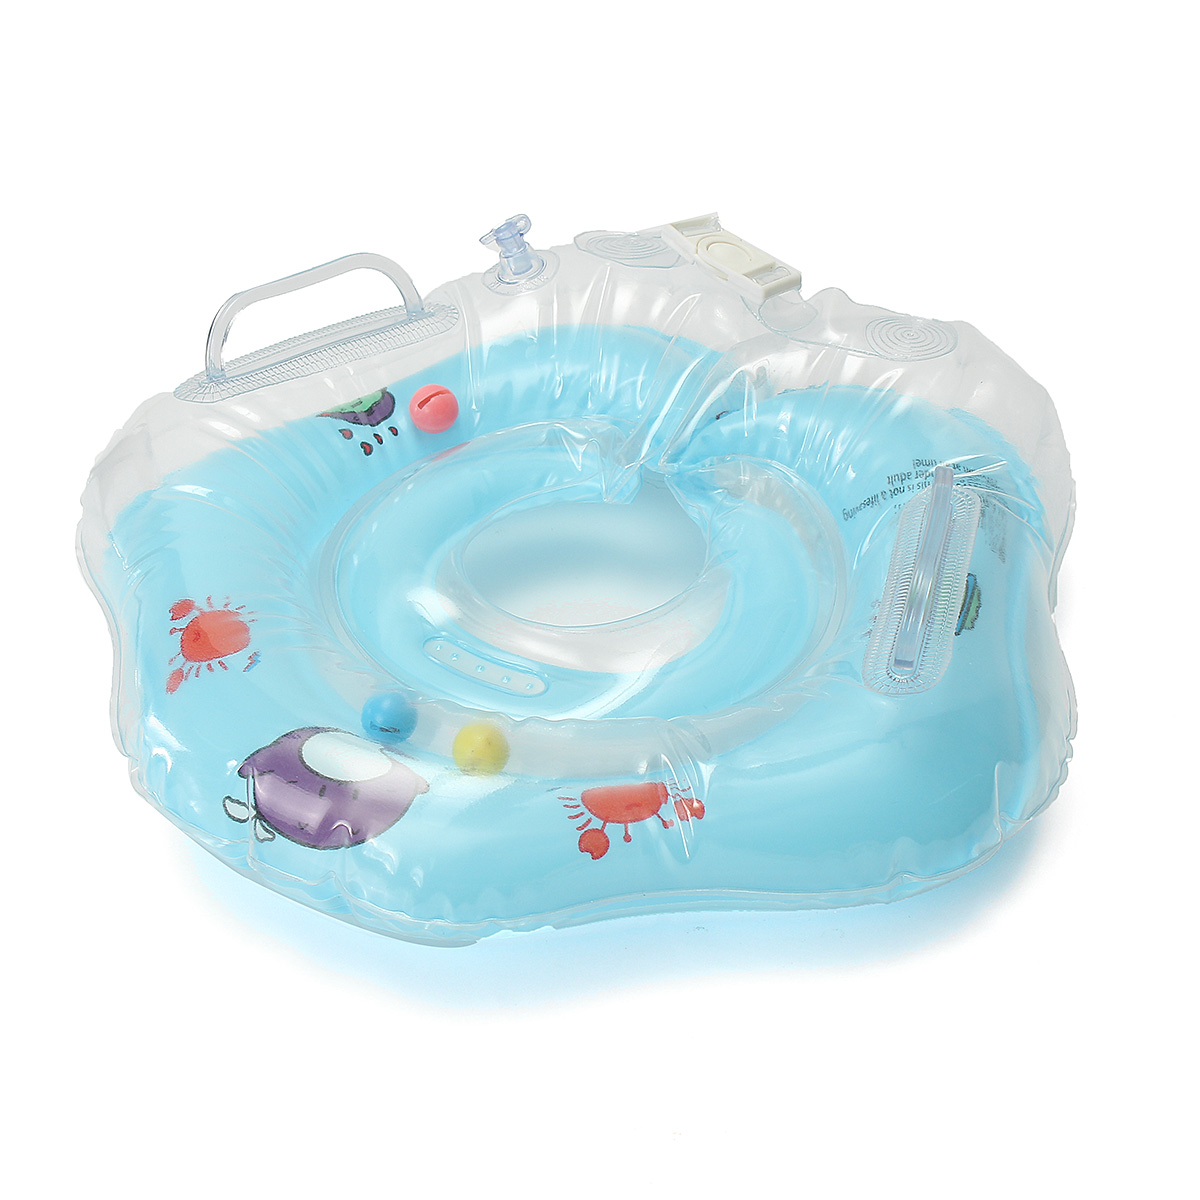 IPReetrade-Baby-Infant-Swimming-Pool-Bath-Neck-Floating-Inflatable-Ring-Built-in-Belt-1169362